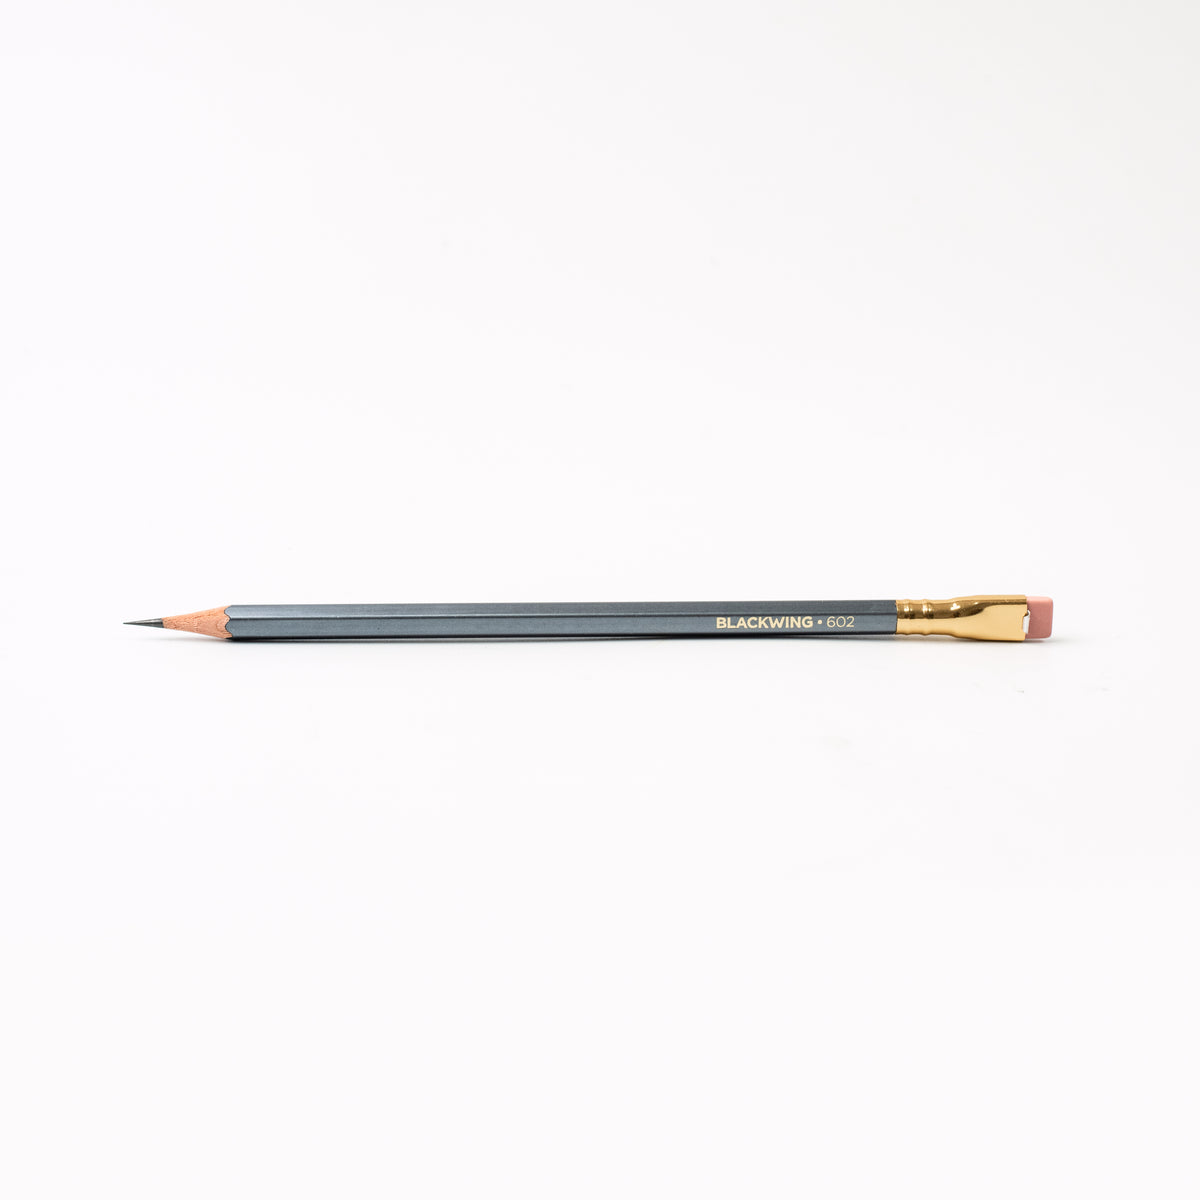 A Blackwing 602 (Set of 12) pencil is resting on a white surface.